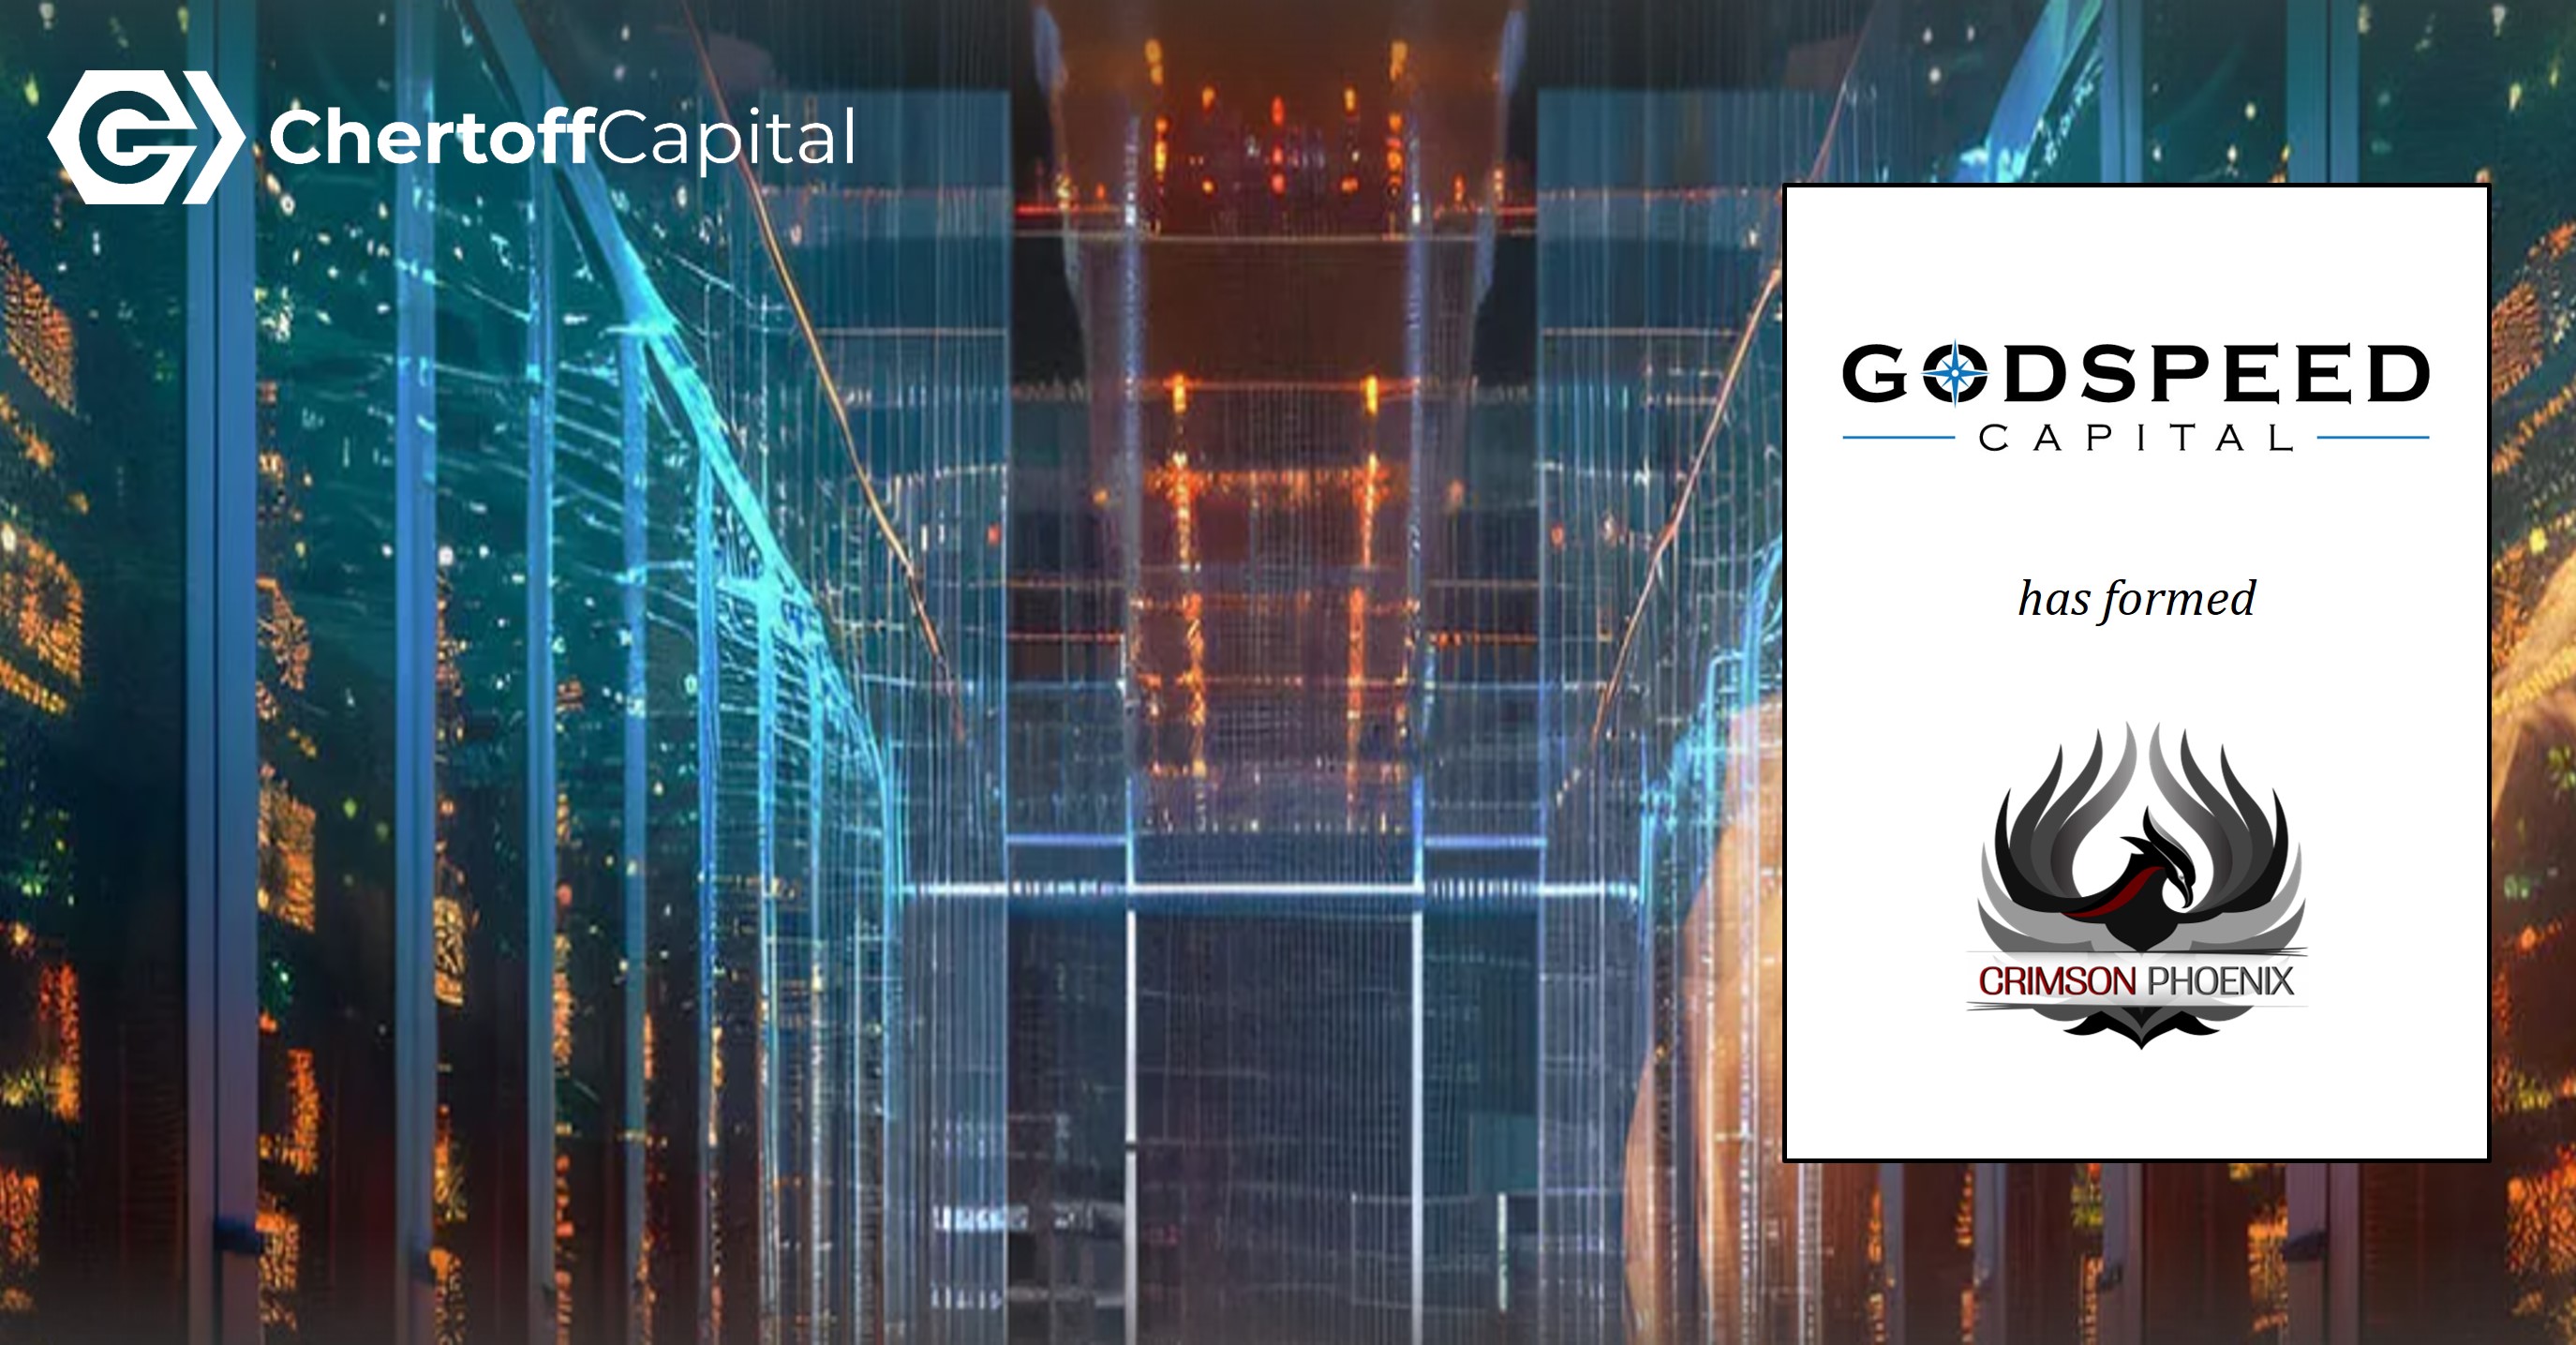 Godspeed Capital Management LP, a lower middle market defense & government services, solutions, and technology focused private equity firm, announced the formation of Crimson Phoenix, a data and intelligence solutions platform designed to support critical mission requirements of the U.S. Intelligence Community and U.S. Special Operations Command.  Chertoff Capital, LLC, the investment banking subsidiary of The Chertoff Group, served as the exclusive investment banking advisor to Godspeed.